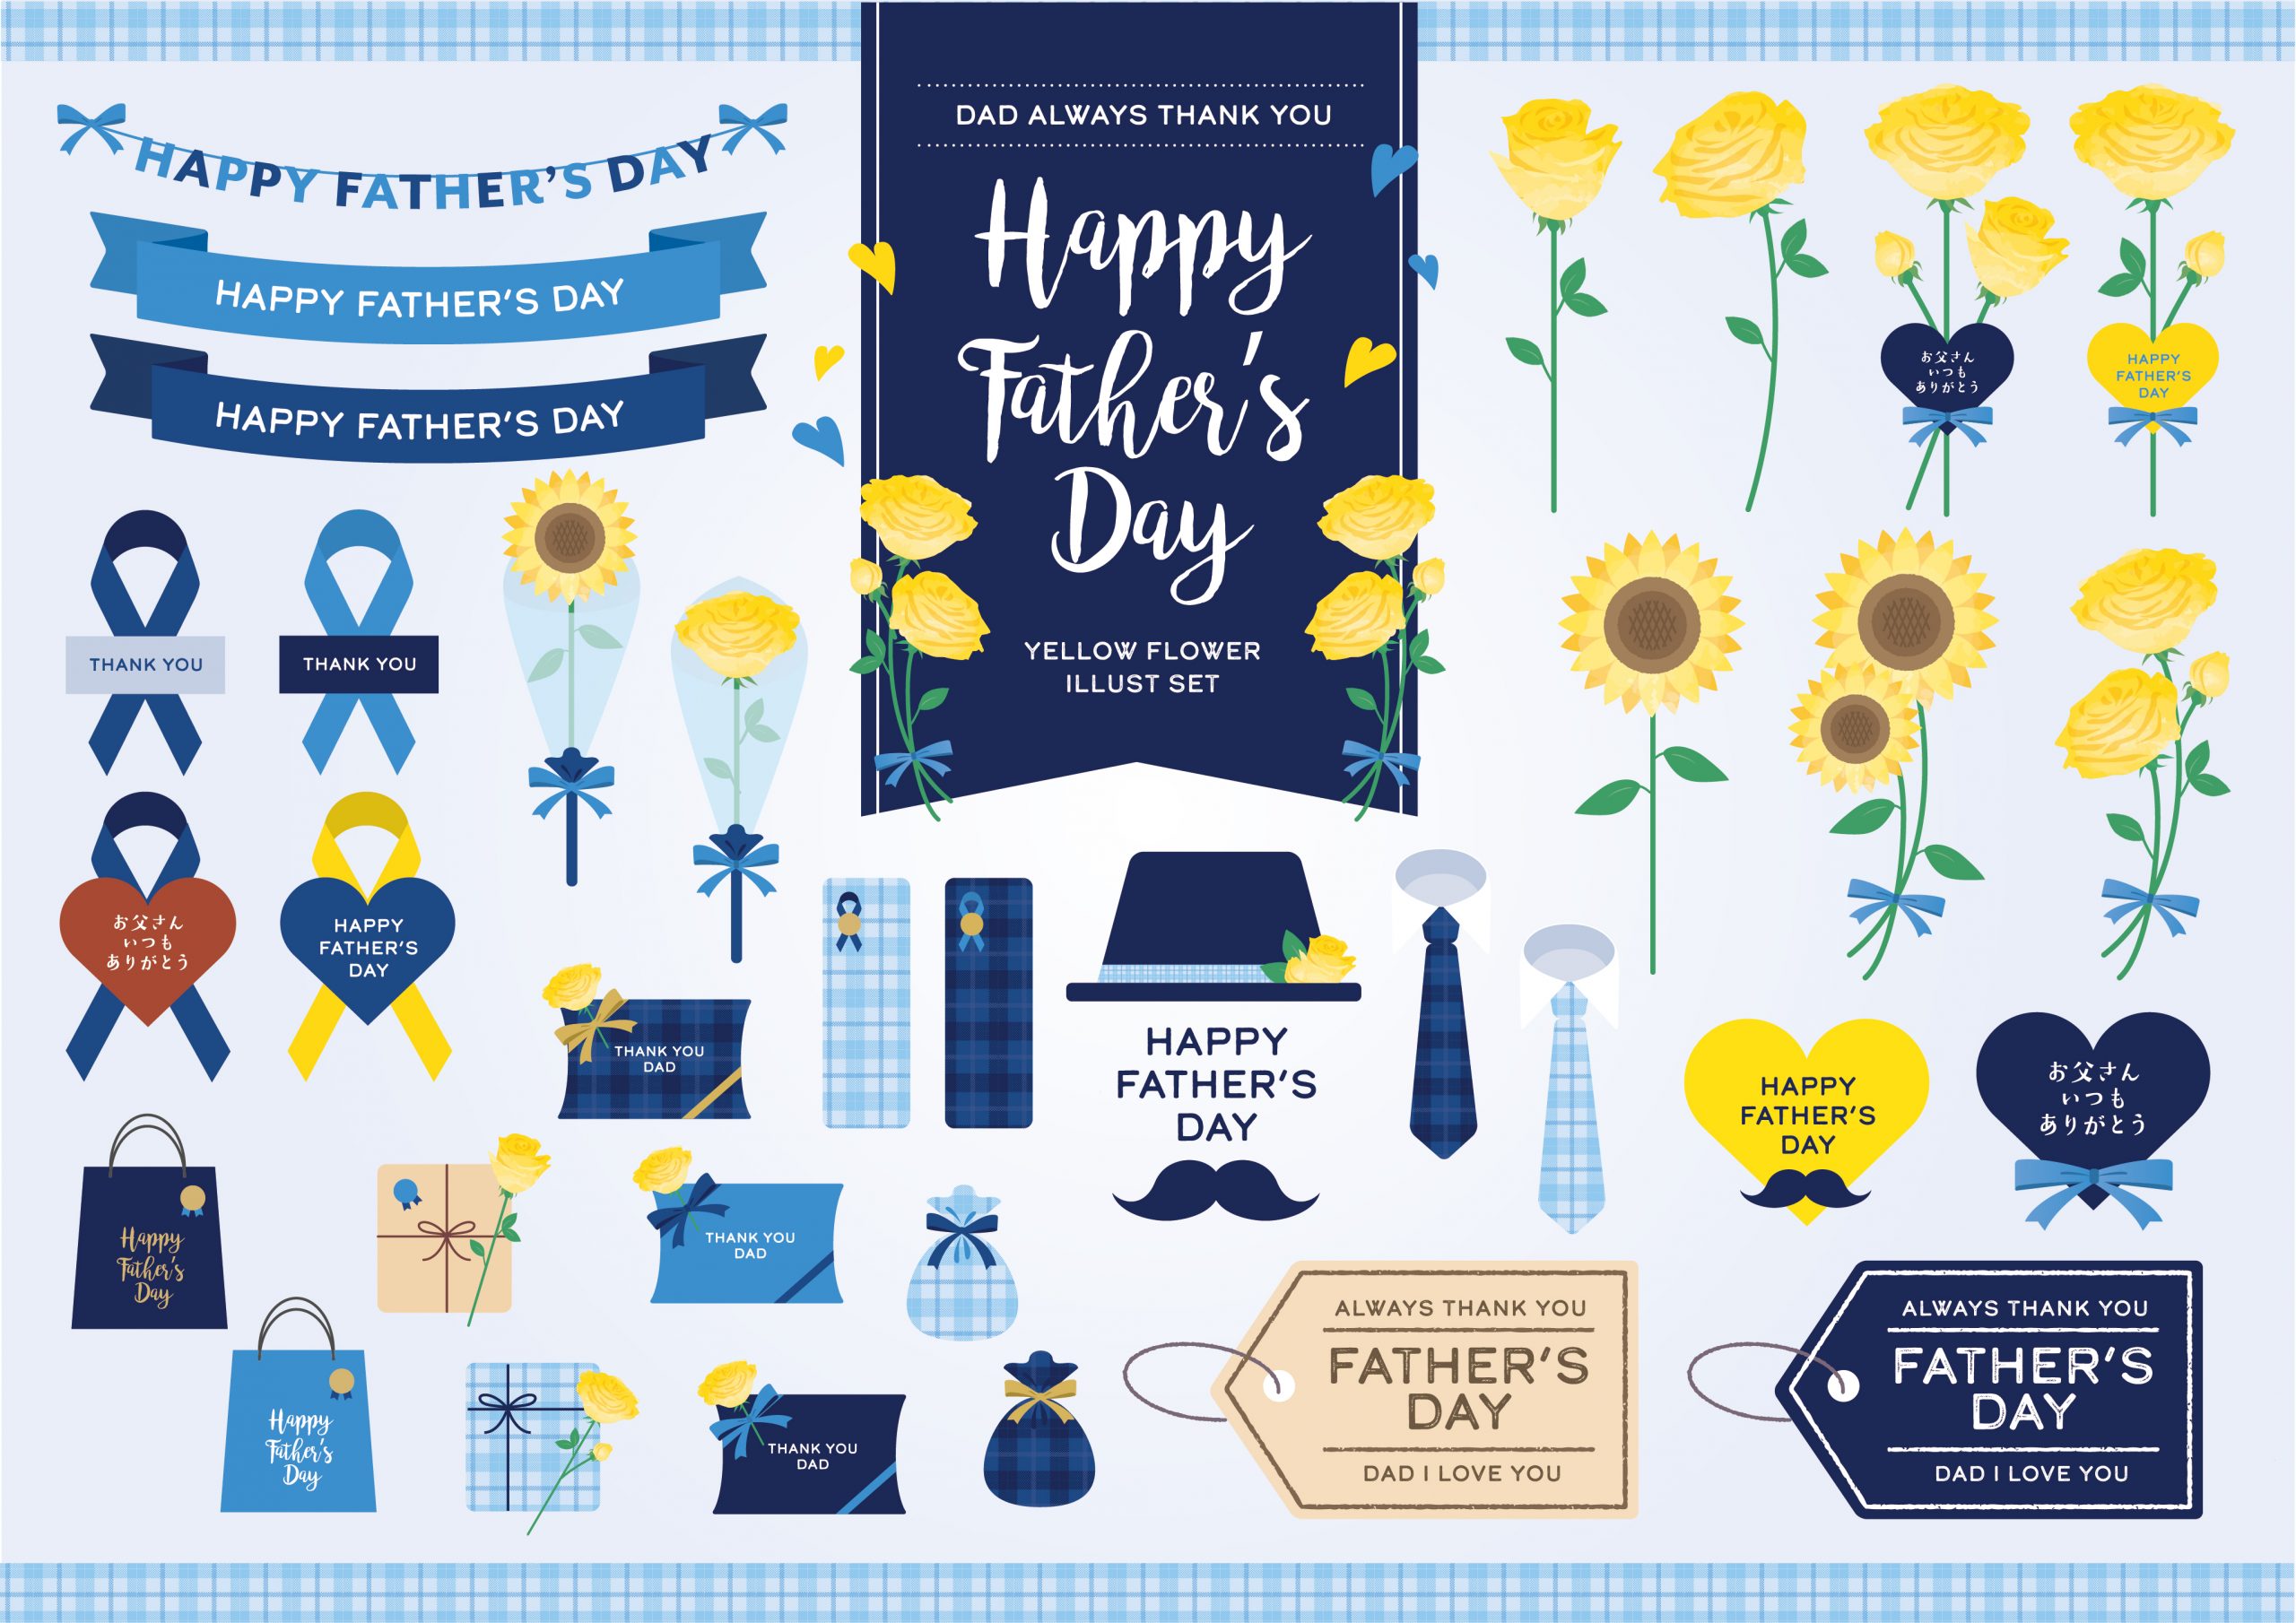 10 Happy Father’s Day Images for Free Download